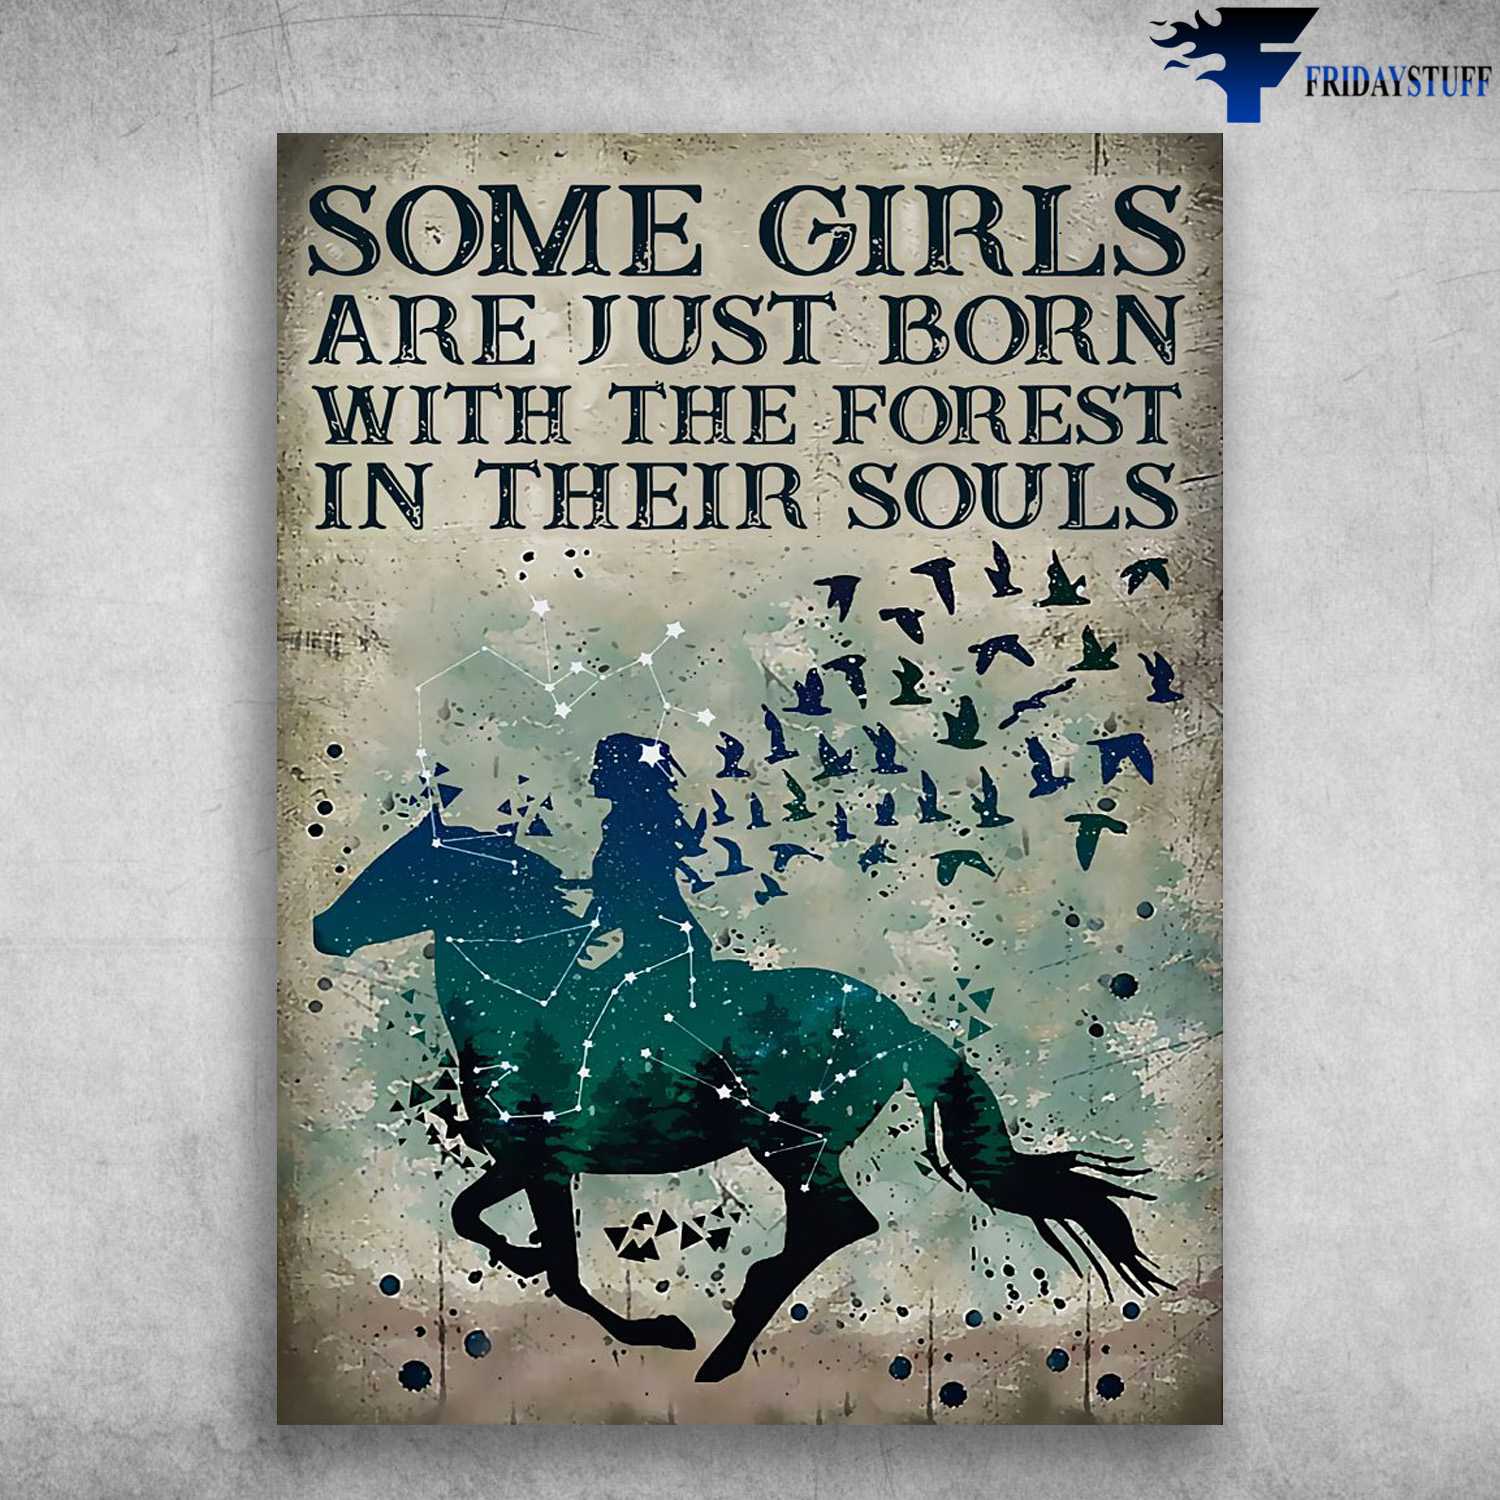 Horse Riding, Horse Poster, Some Girls Are Just Born, With The Forest In Their Souls